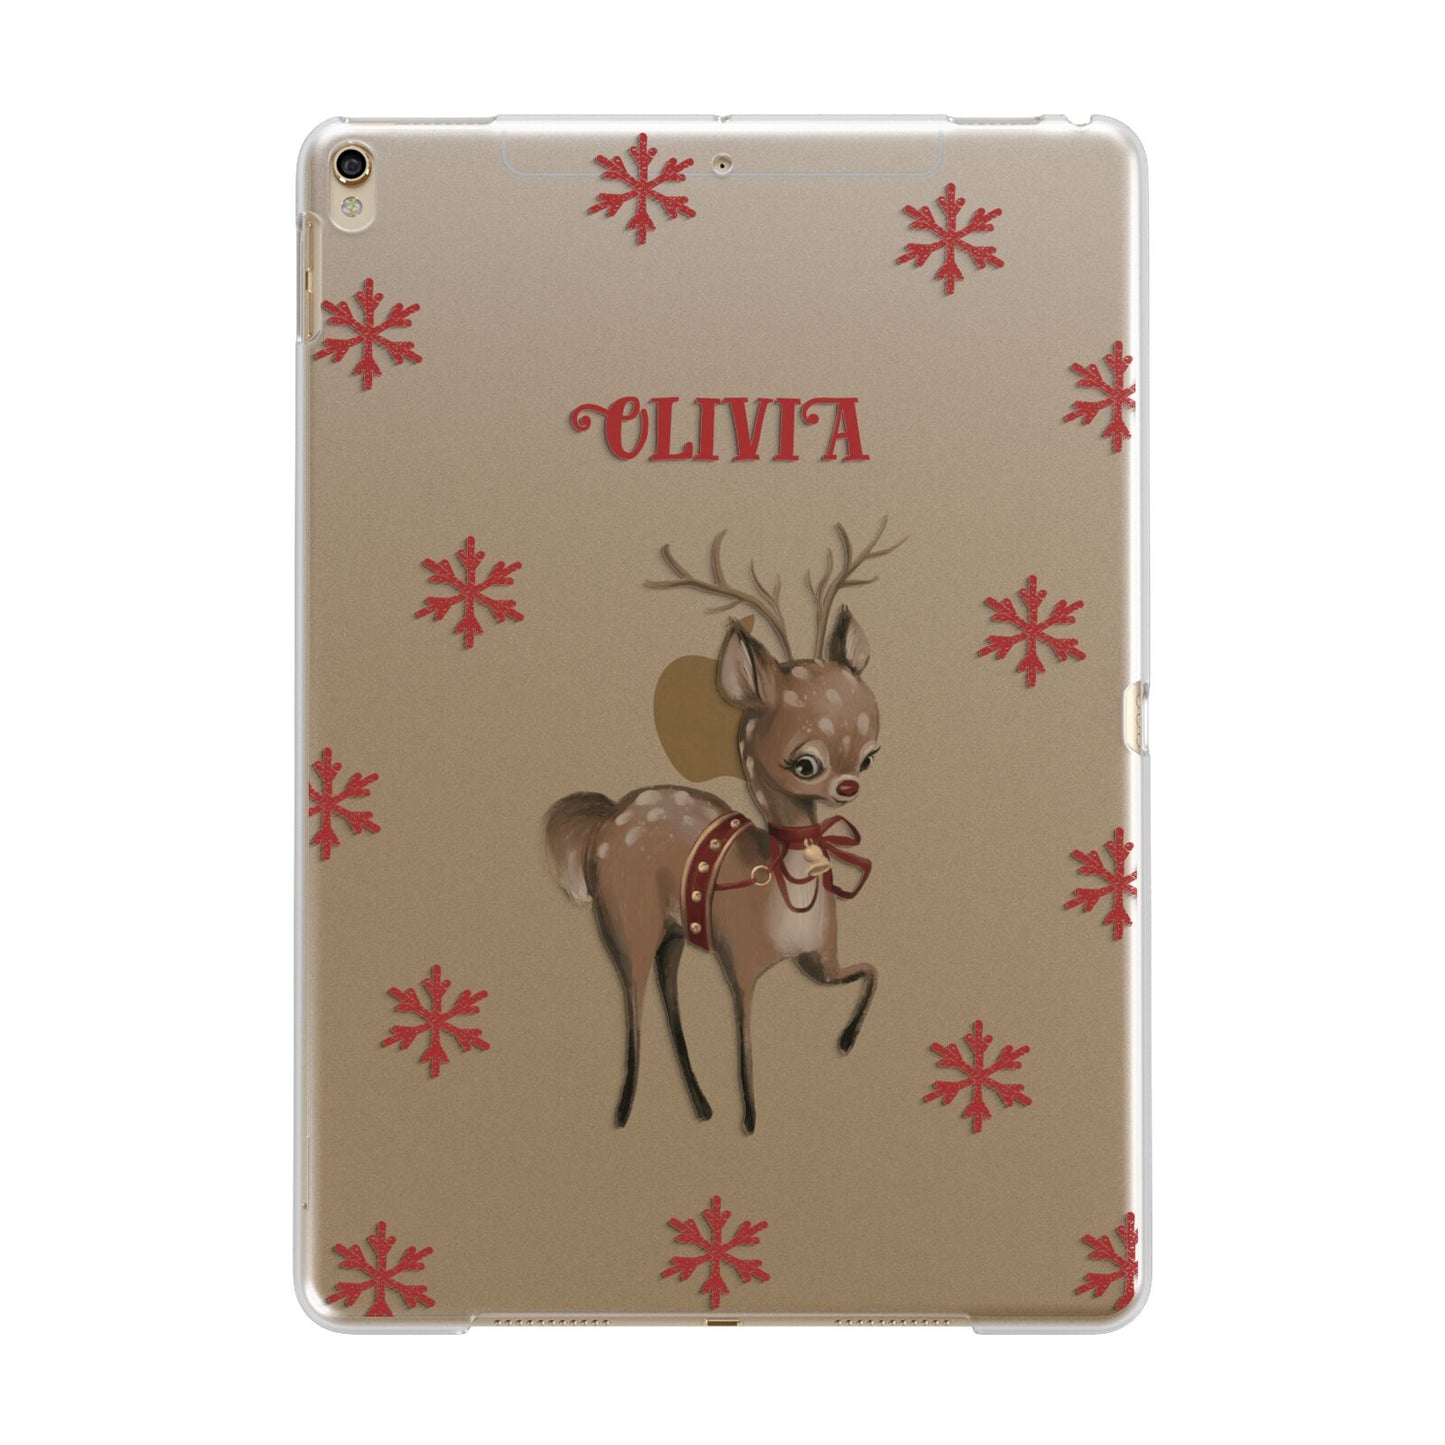 Rudolph Delivery Apple iPad Gold Case